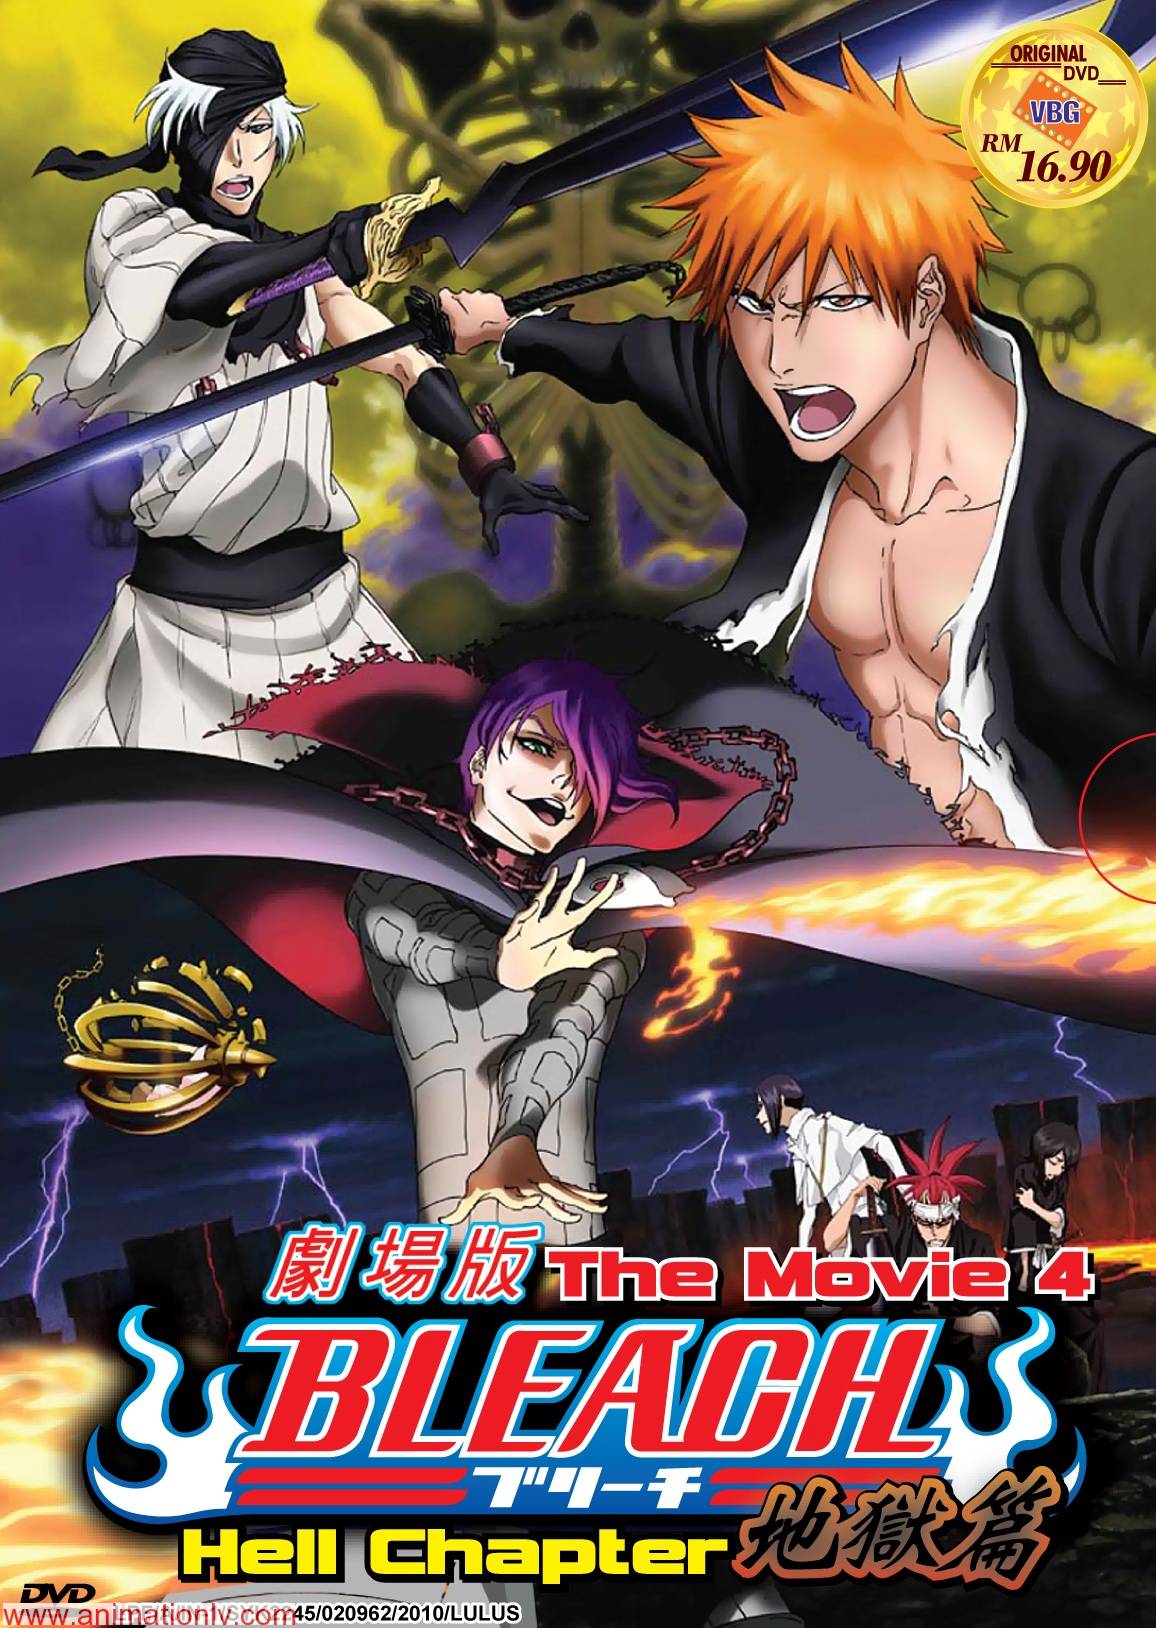 Bleach Movie 4 - Hell Chapter